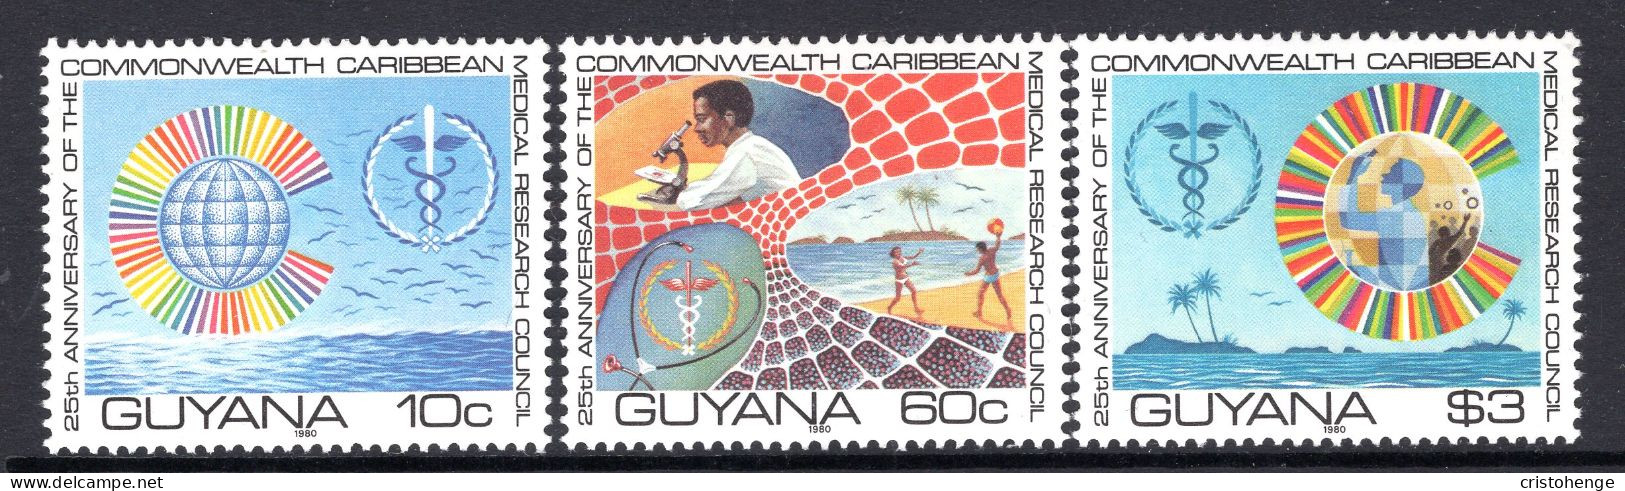 Guyana 1980 25th Anniversray Of Commonweath Caribbean Medical Research Council Set HM (SG 749-751) - Guyane (1966-...)